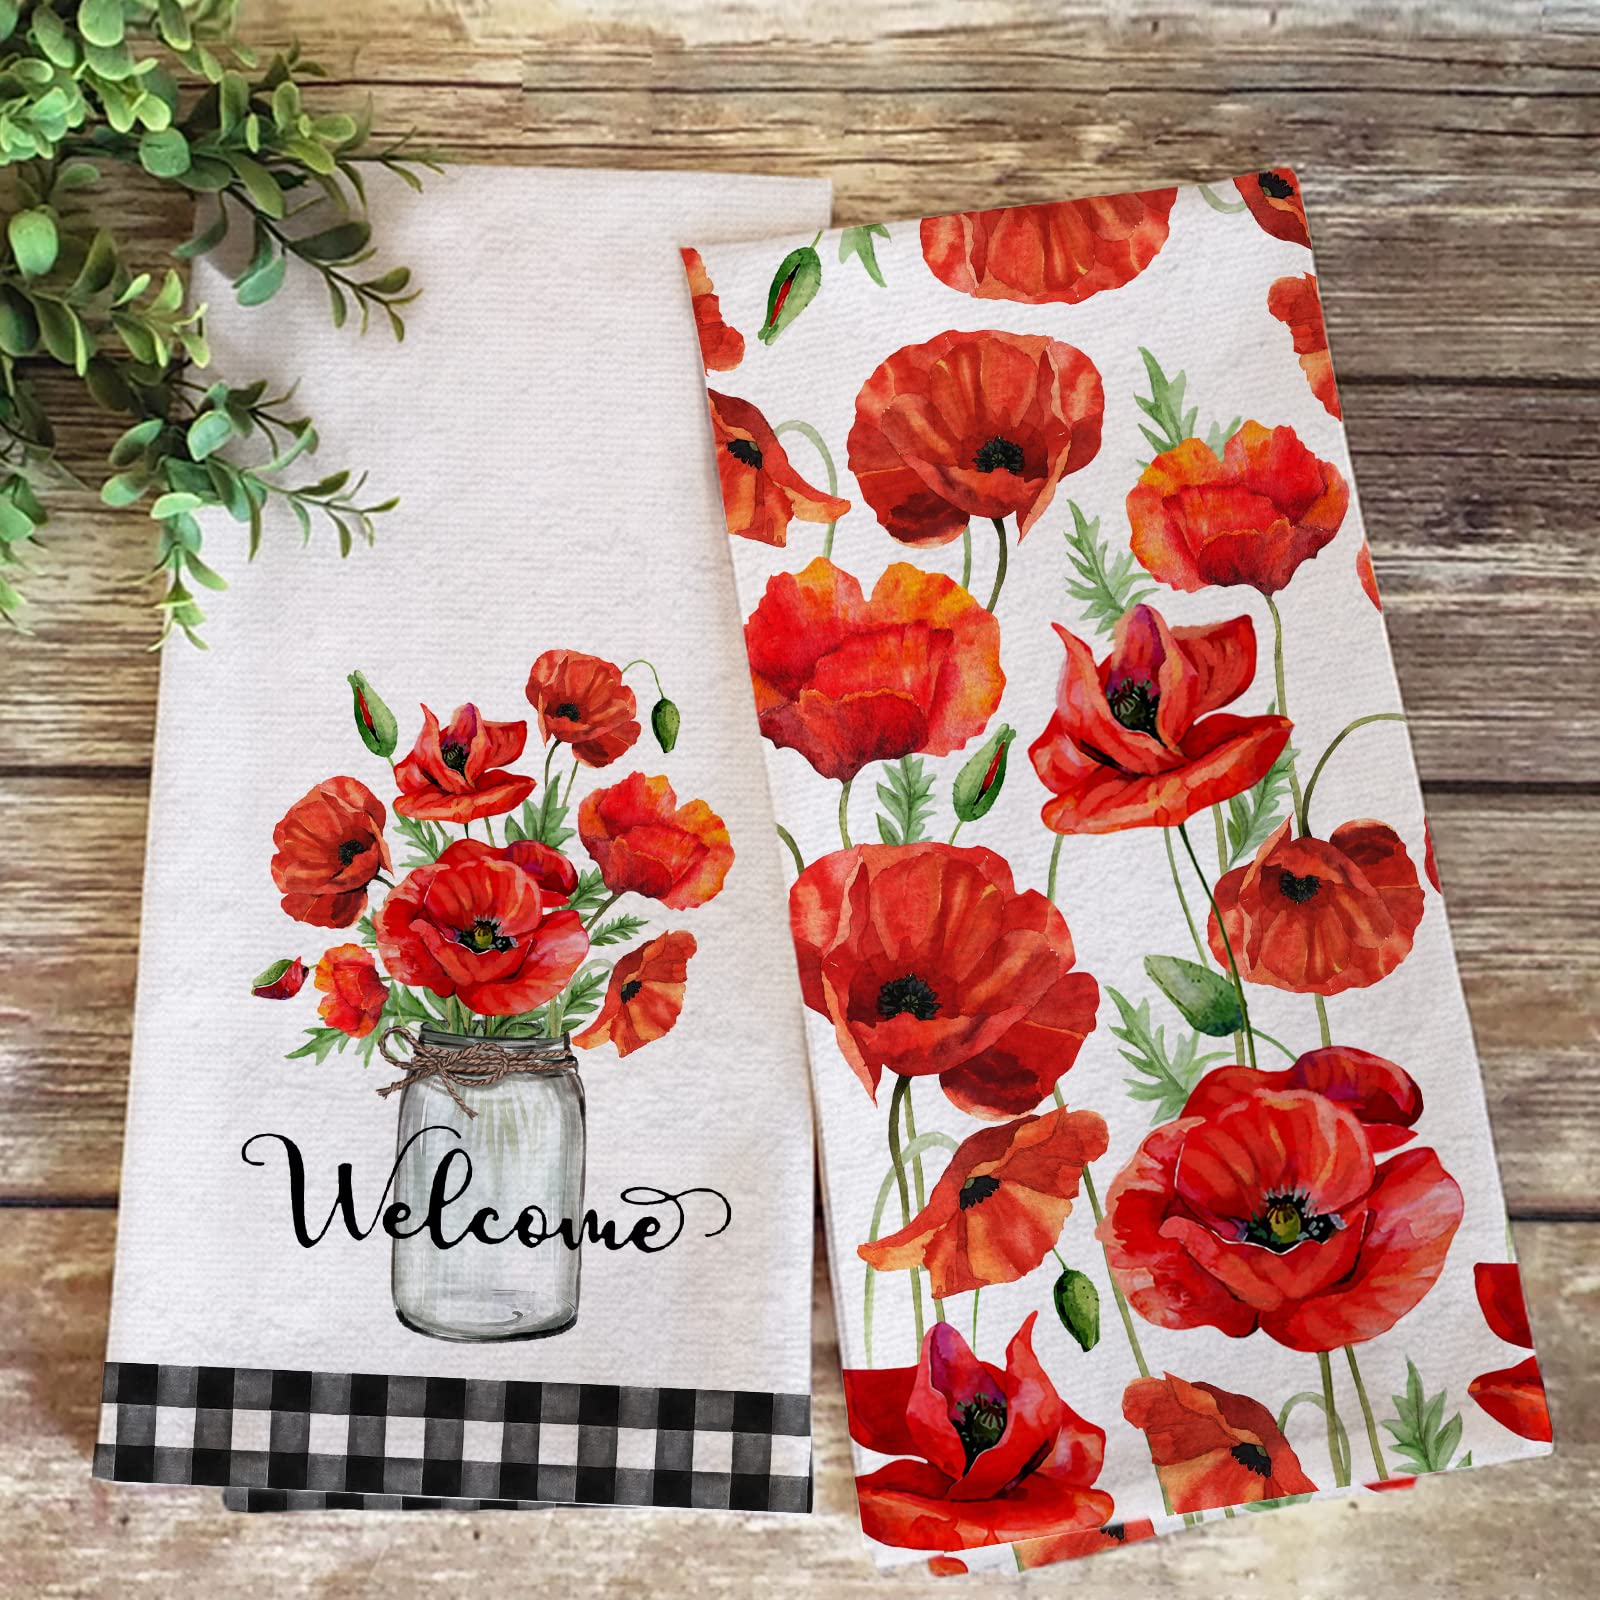 Seliem Welcome Spring Poppy Flower Kitchen Dish Towel Set of 2, Red Floral Hand Towel Buffalo Plaid Check Drying Baking Cooking Cloth, Watercolor Summer Seasonal Kitchen Decor 18x26 Inches